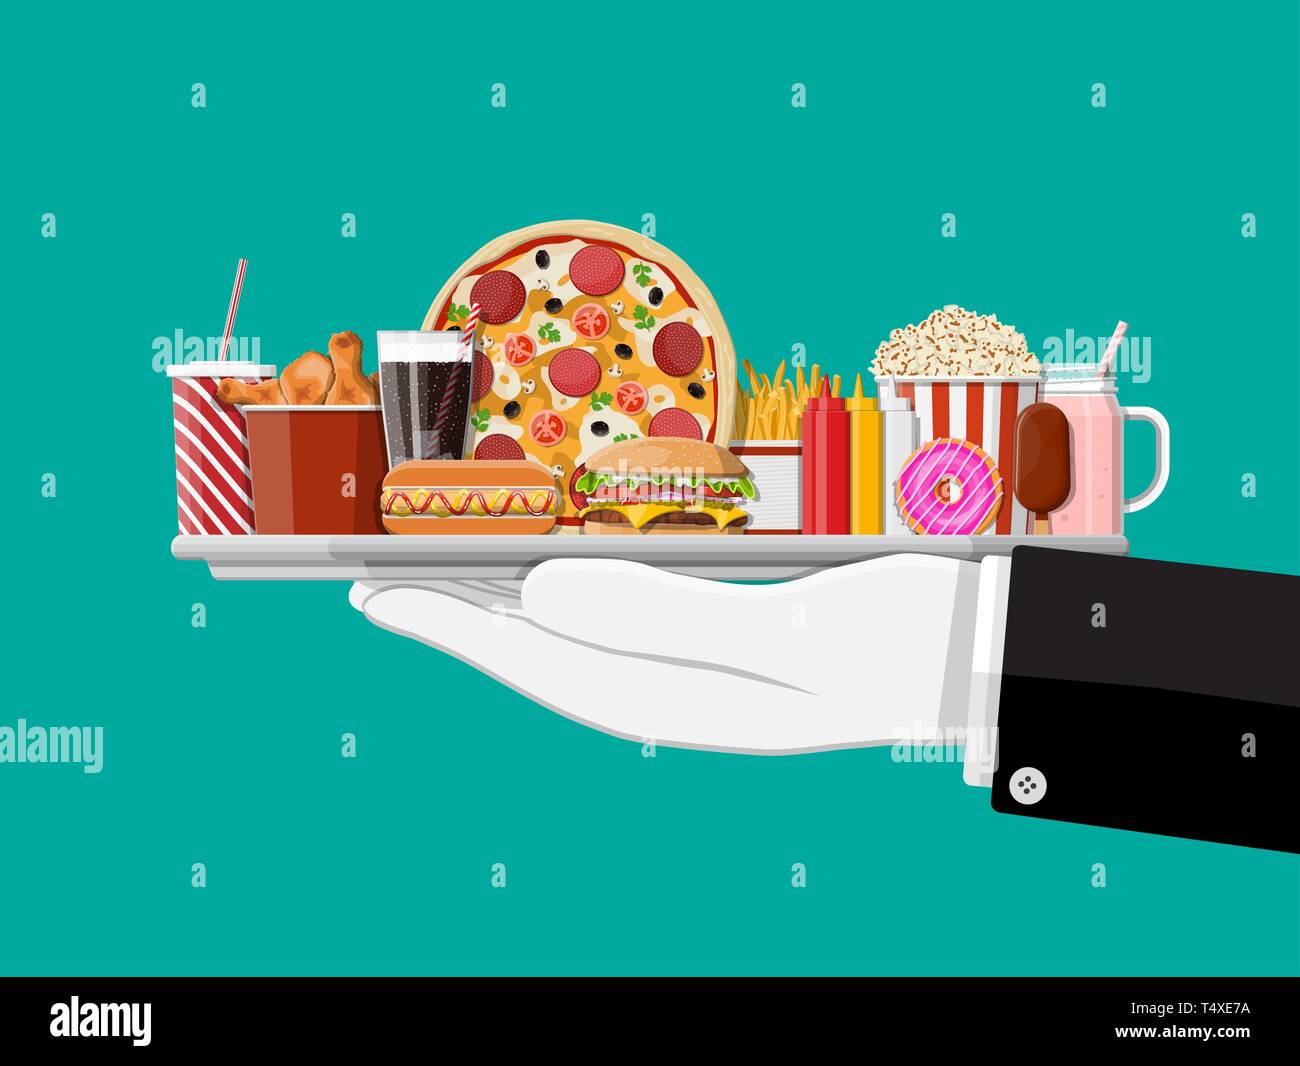 Tray with fast food in hand of waiter. Burger, pizza, hotdog, fried chicken, fries, popcorn, donut, milk cocktail cola soda, ice cream, glass bottles  Stock Vector